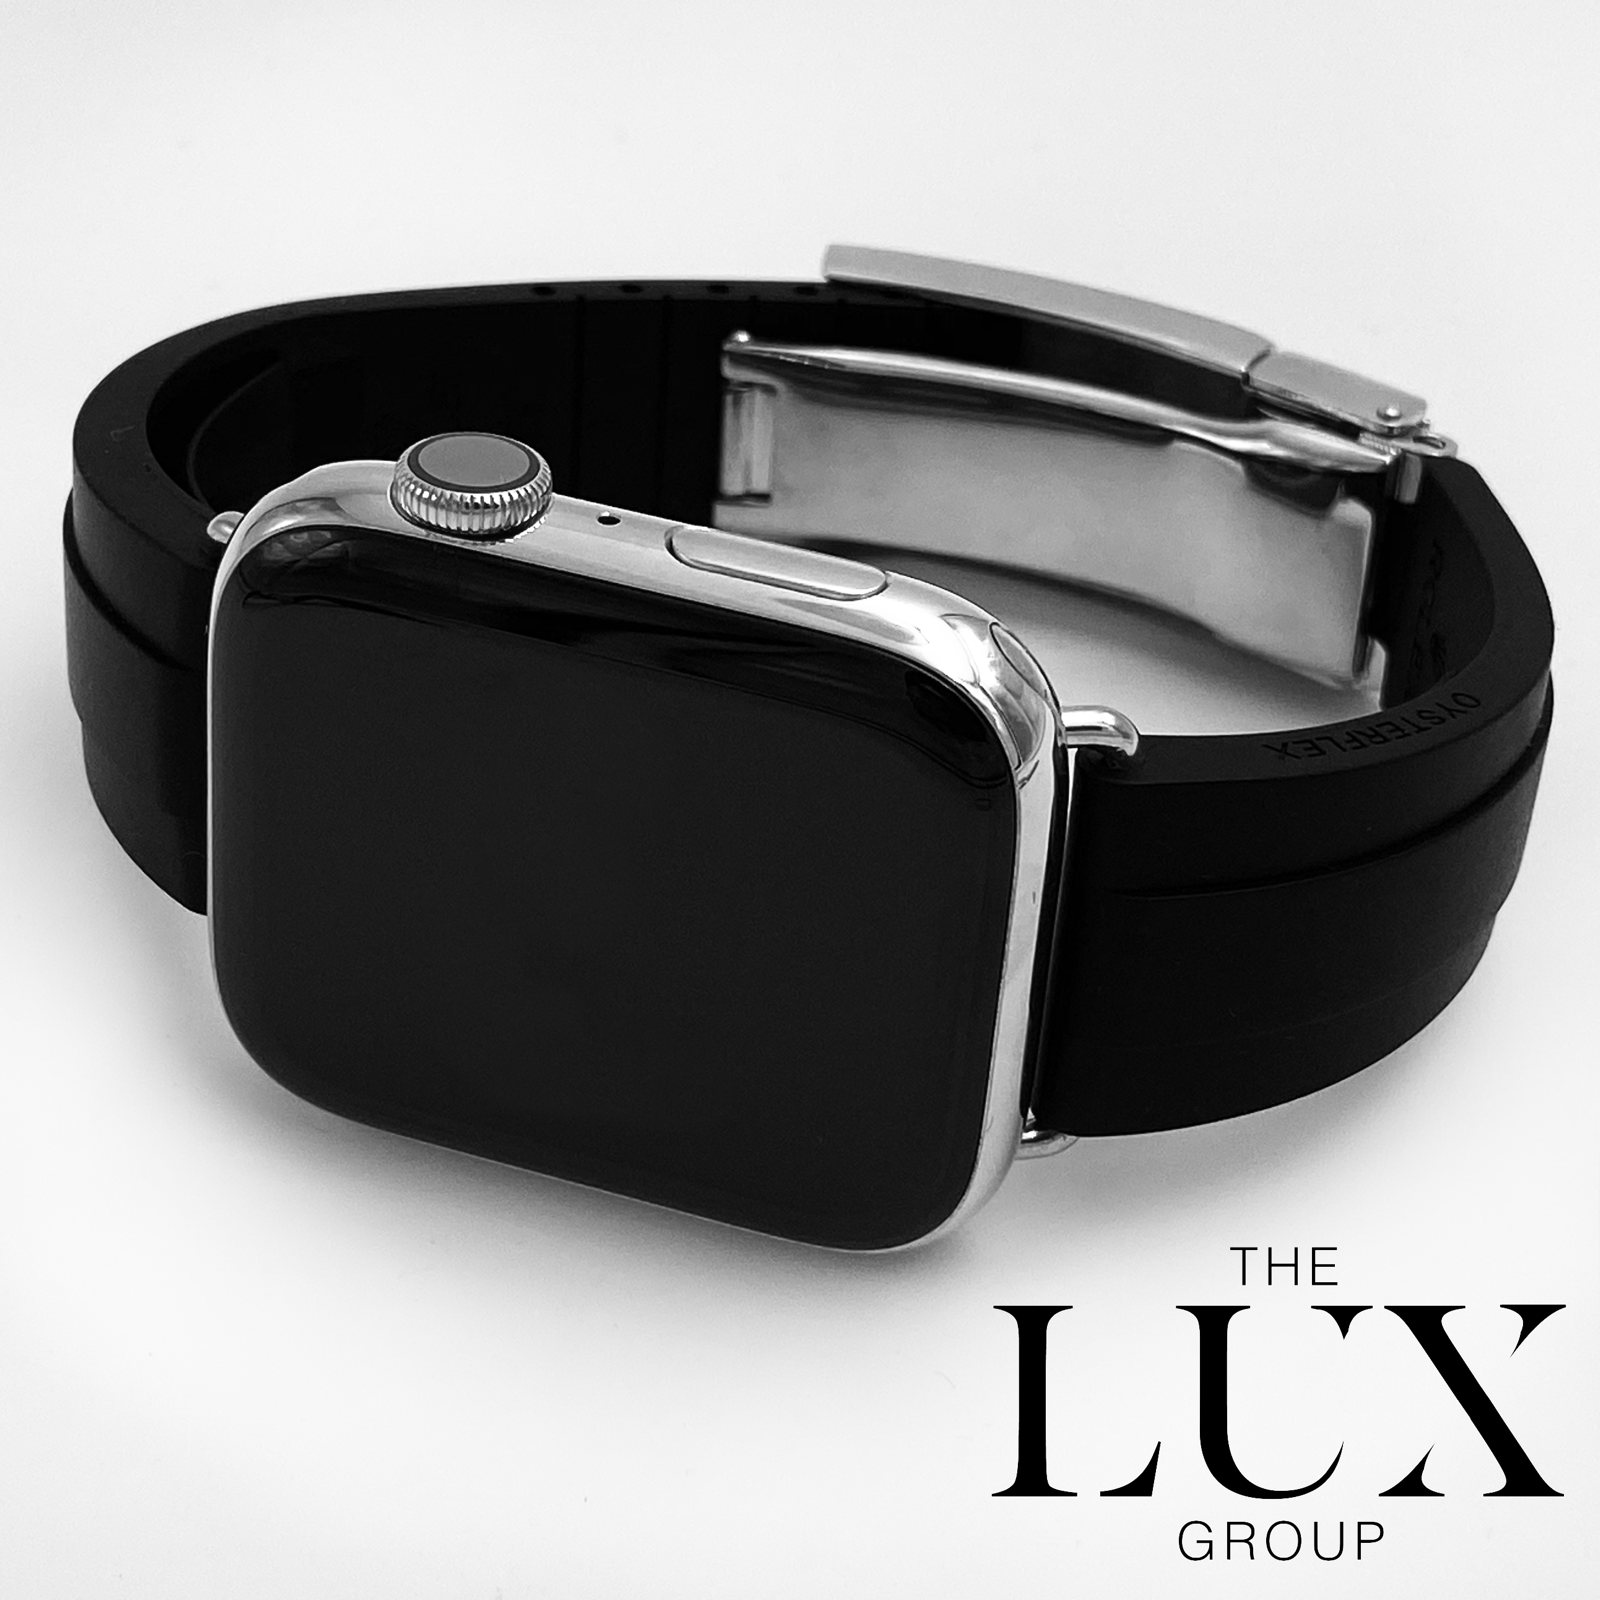 45mm Series 8 Apple Watch with Silver Rolex Deployment - The Lux Group